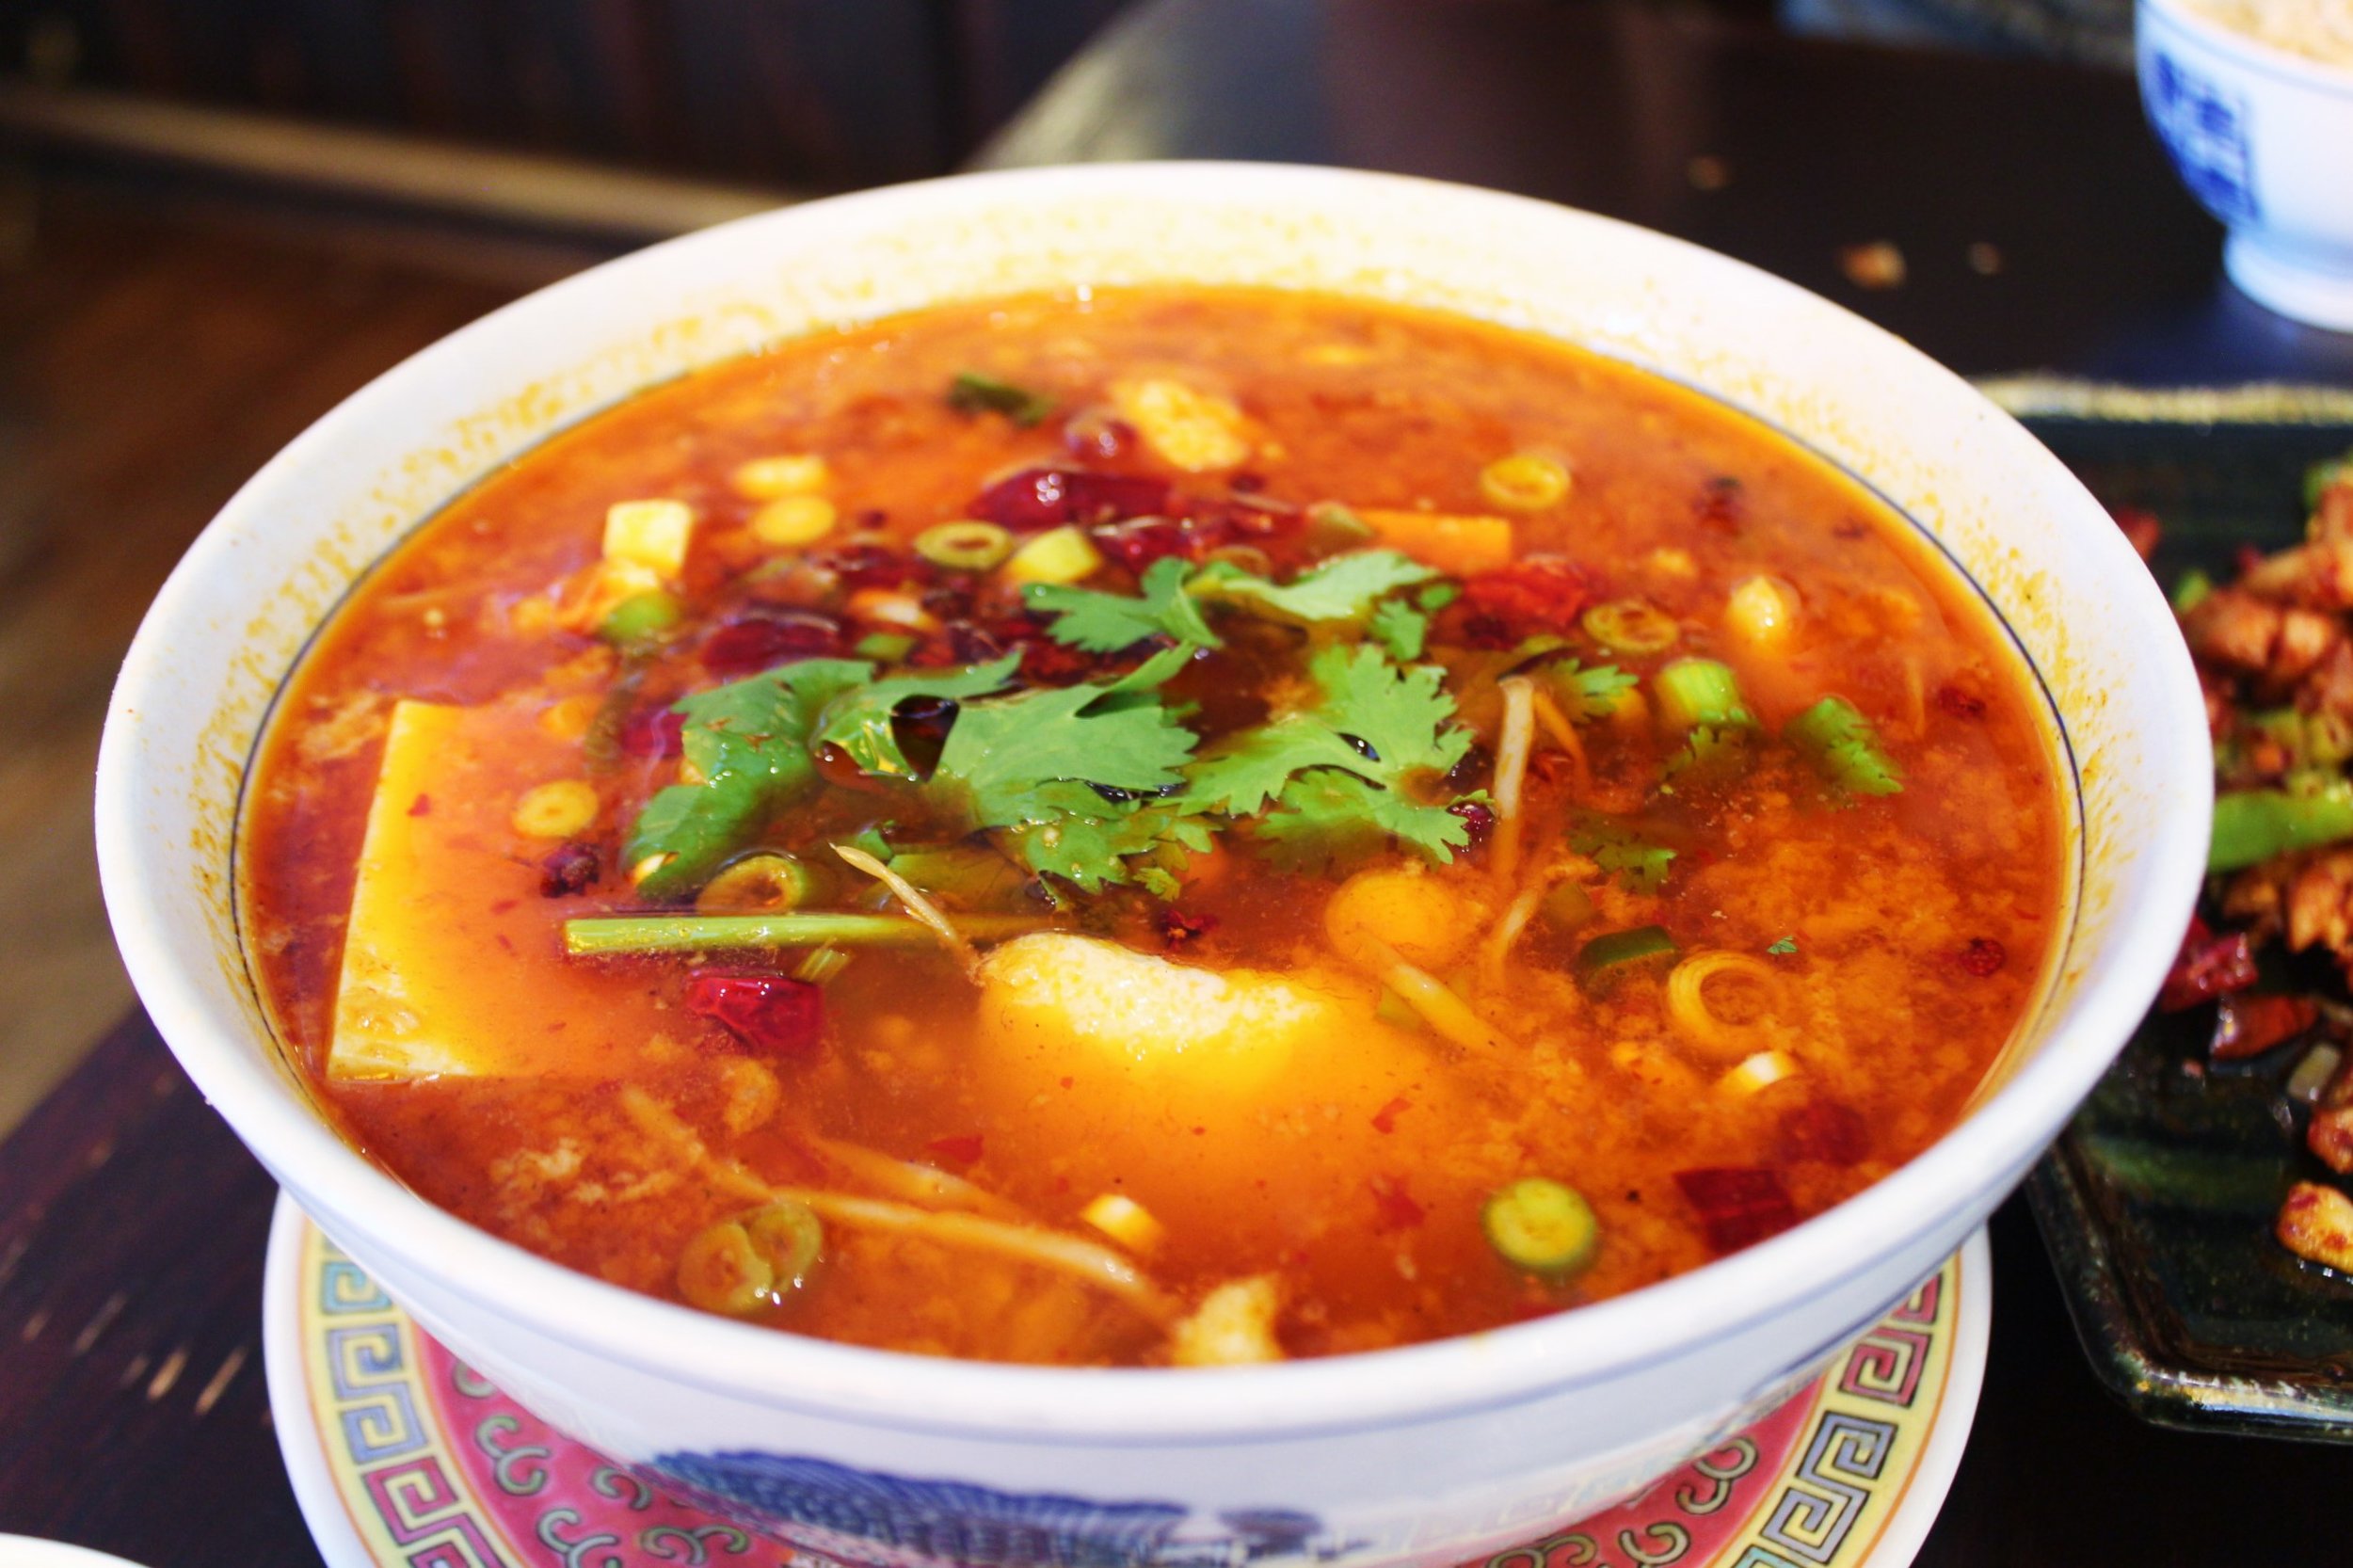 Chungking Braised Fish In Red Soup: white fish with chili oil &amp; peppercorn